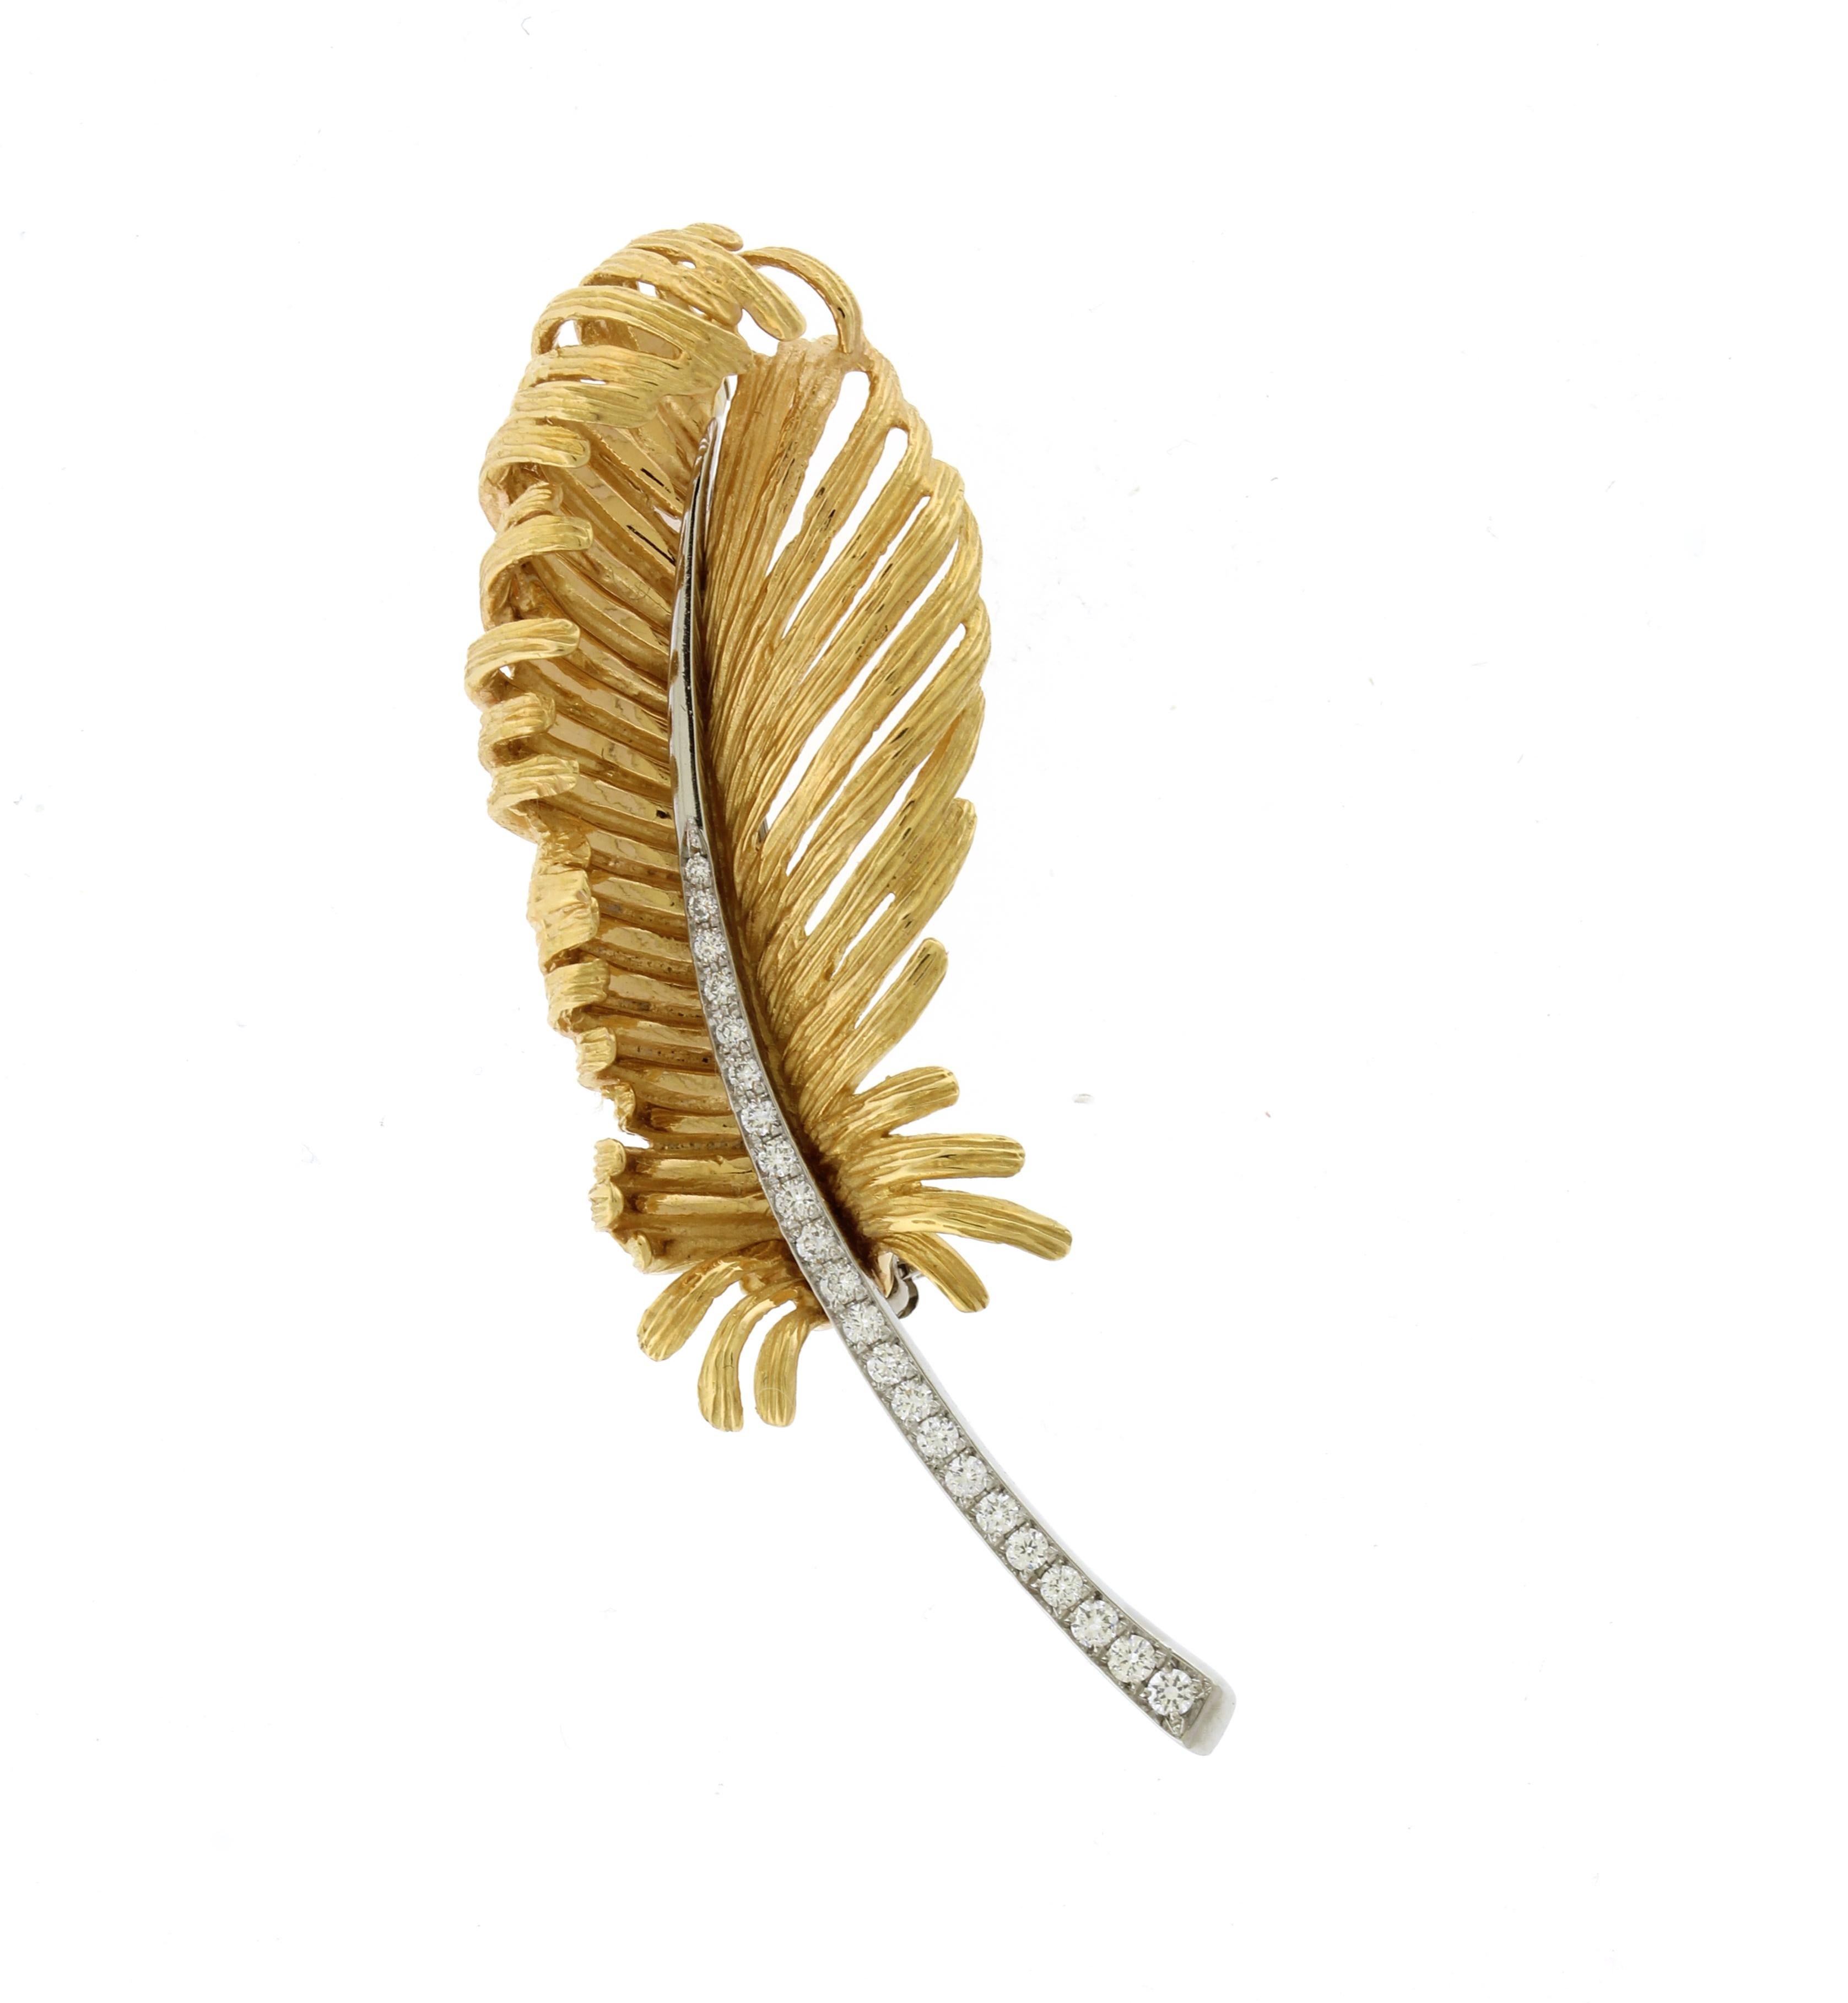 This textured feather is rose gold with diamonds set in platinum.  
• Metal: 18kt Rose Gold and Platinum
• Designer: Pampillonia Jewelers
• Gemstone: Diamonds
• Length: 2 1/8
• Weight: 10.8 grams
• Diamonds: 22 = .24carats
• Packaging: Pampillonia